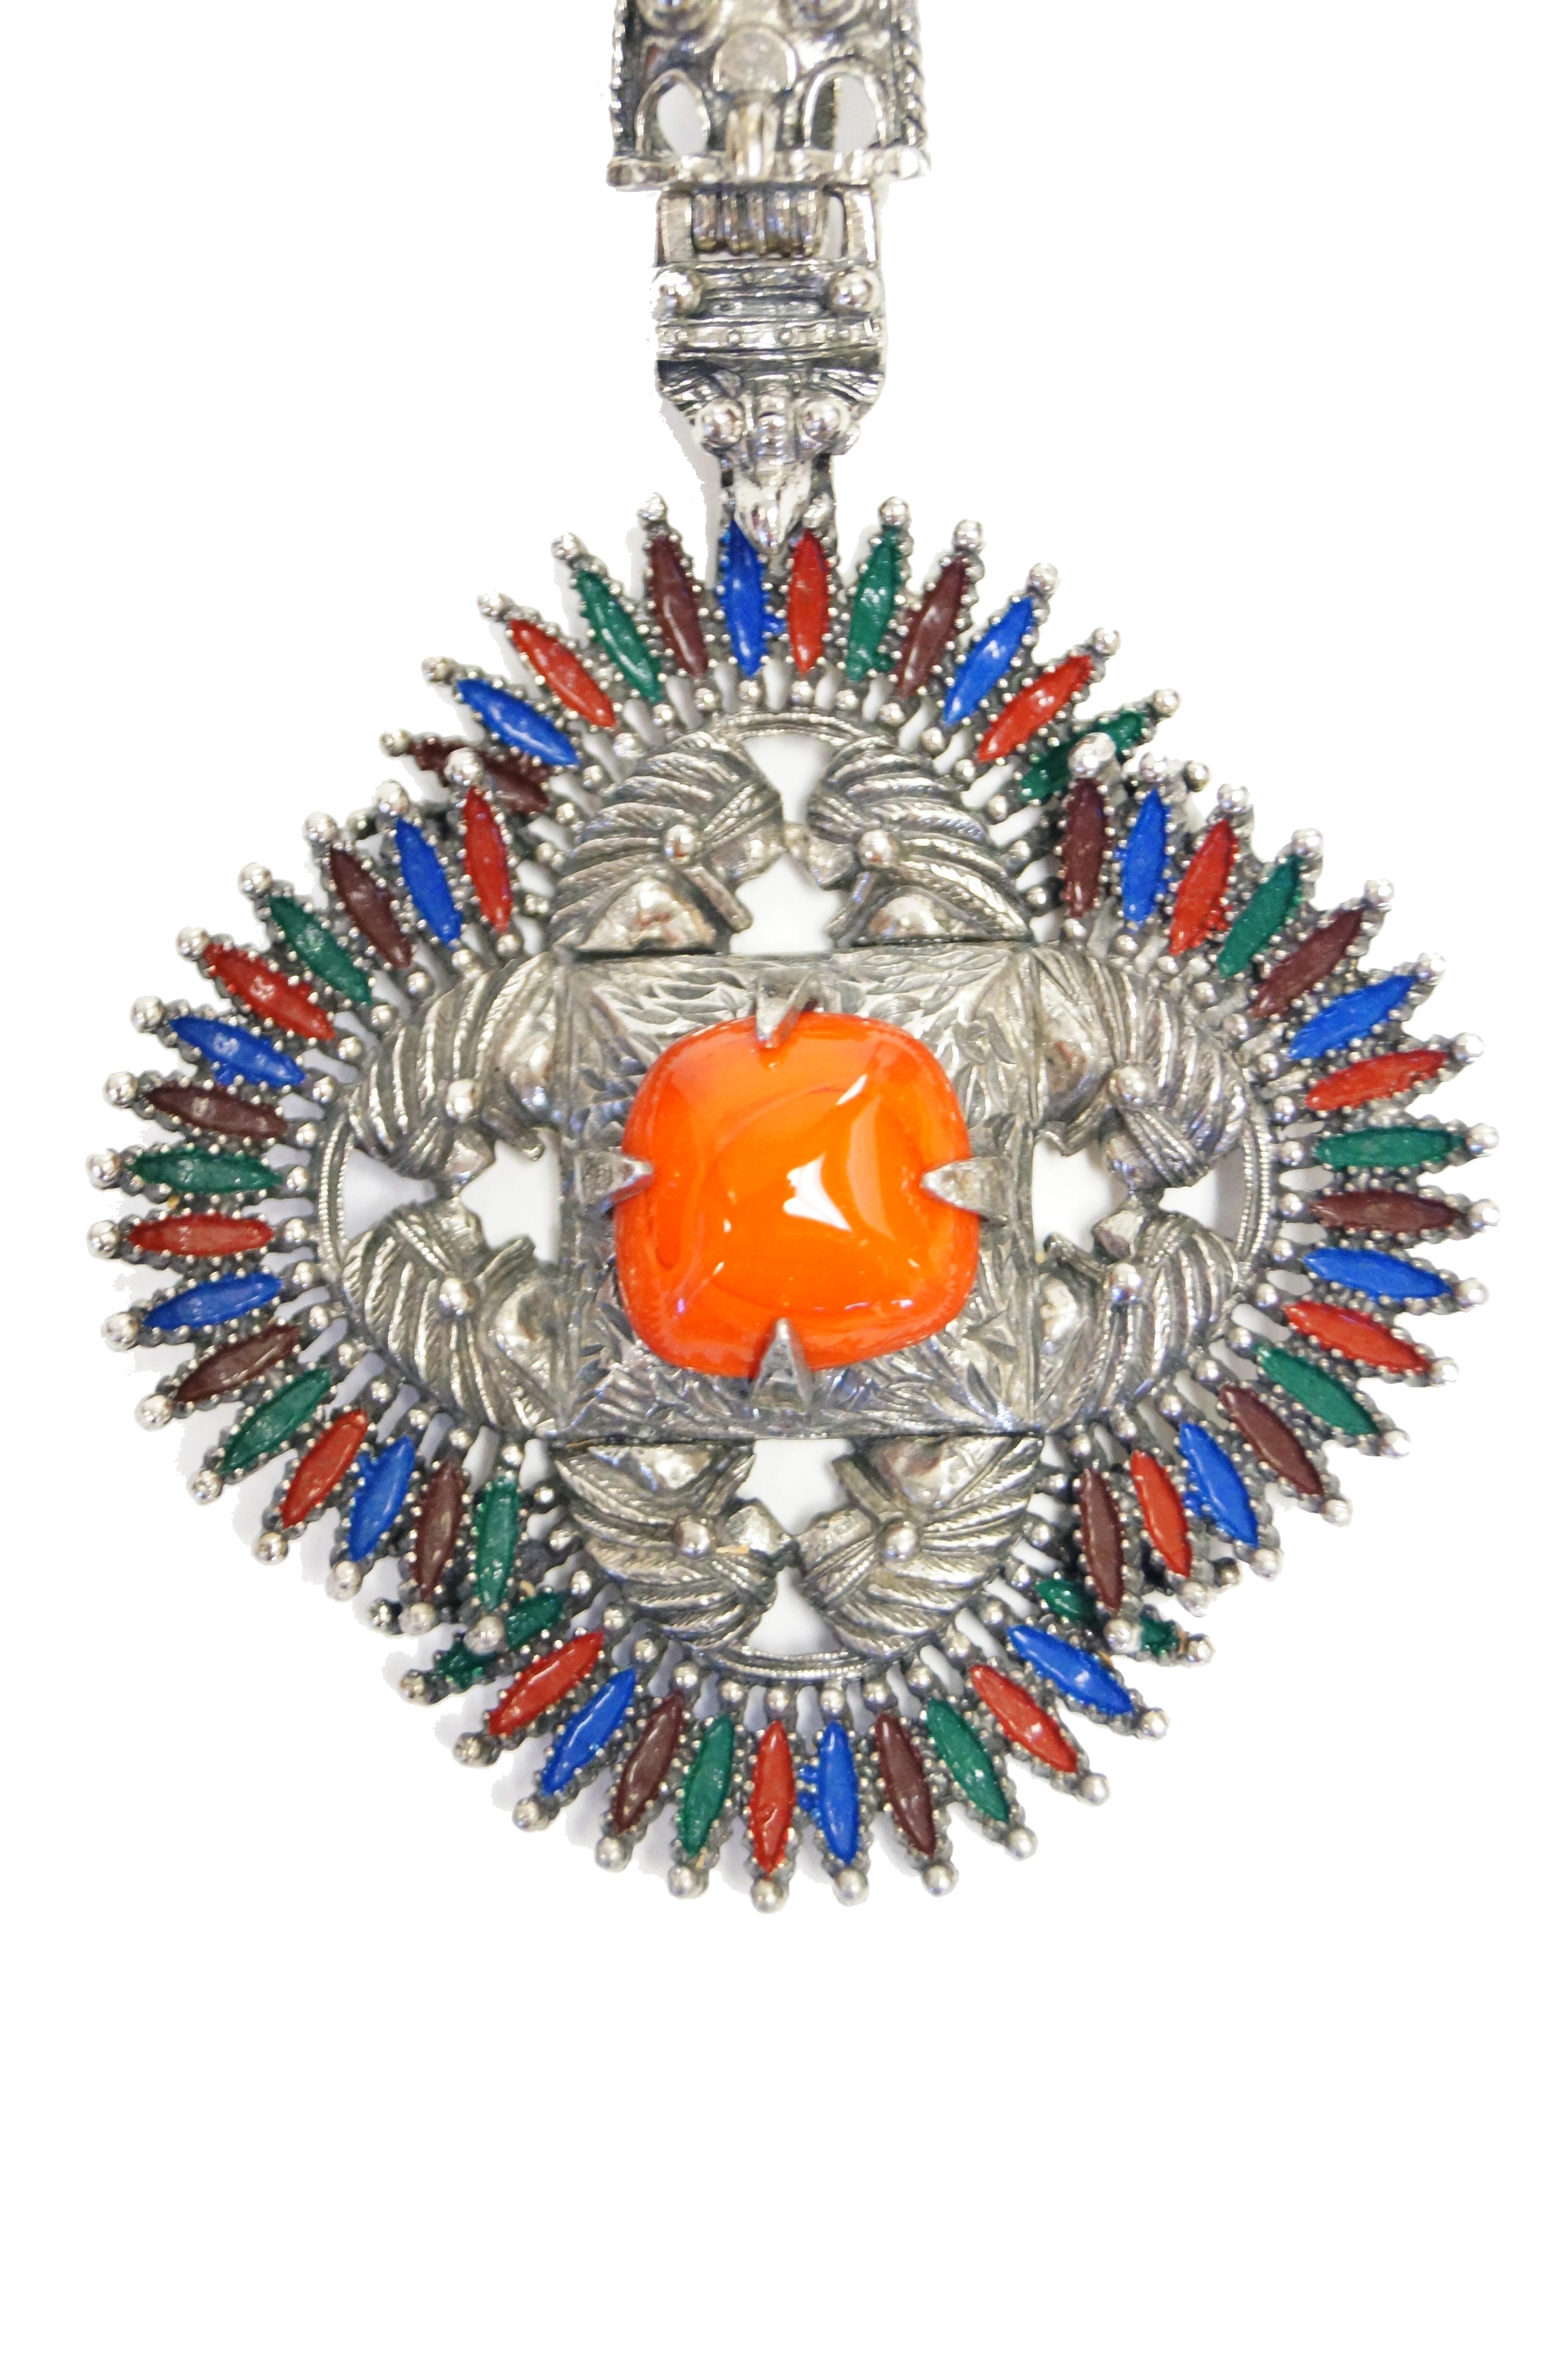 Iconic 1970s VRBA Castlecliff Necklace Pendant In Excellent Condition For Sale In Houston, TX